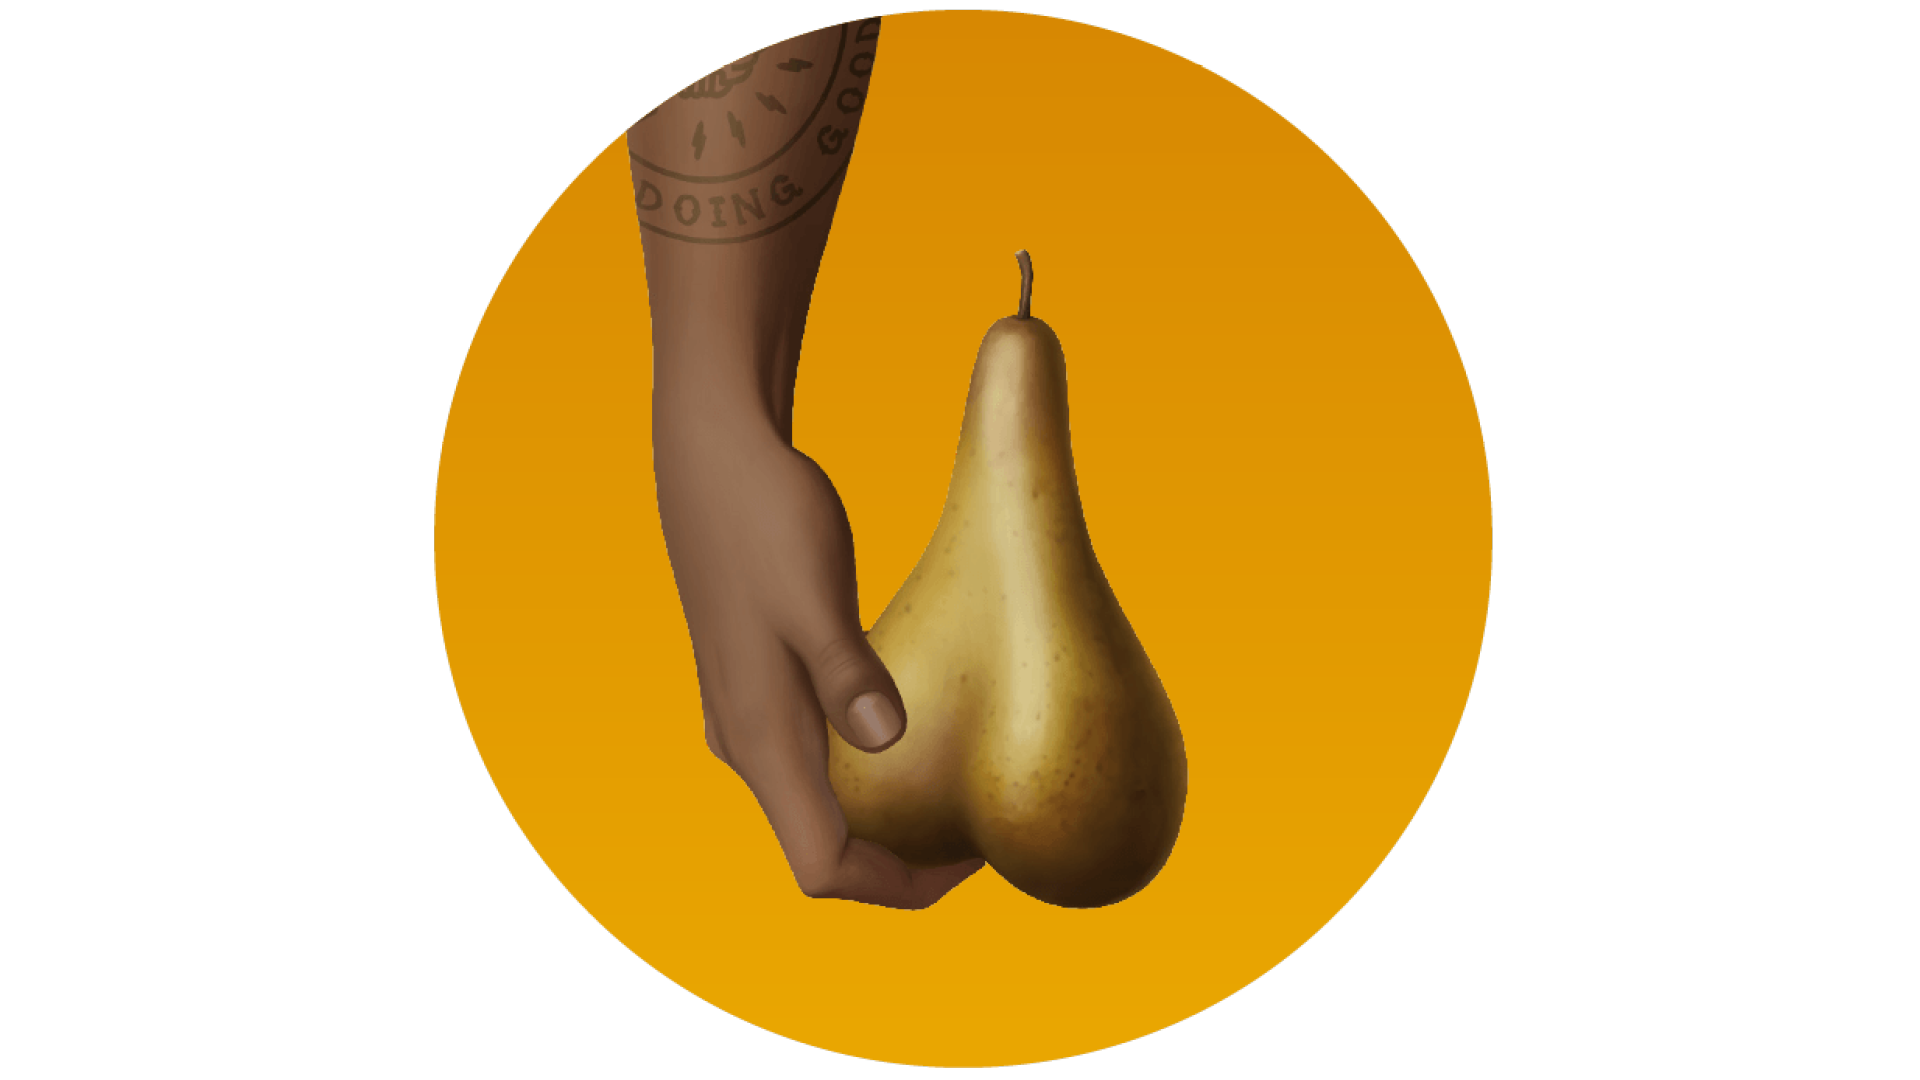 An illustration of a hand feeling a pear (which looks like a pair of testicles)